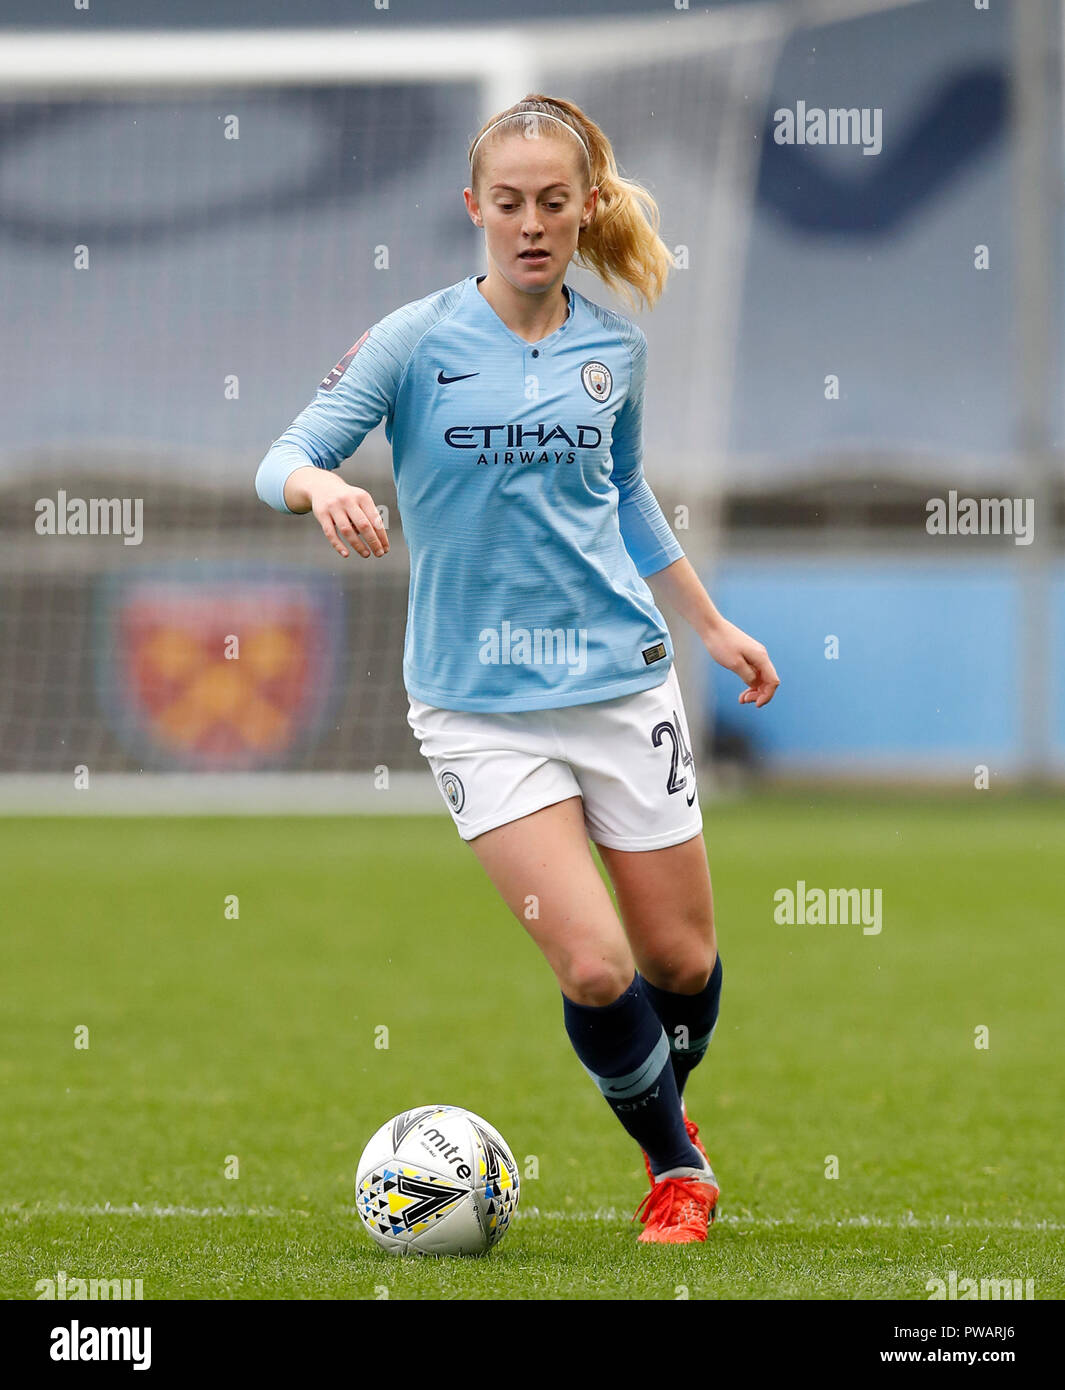 Manchester City's Keira Walsh during the FA Women's Super League match The Academy Stadium, Manchester. PRESS ASSOCIATION Photo. Picture date: Sunday October 14, 2018. See PA story SOCCER Man City Women. Photo credit should read: Martin Rickett/PA Wire. RESTRICTIONS: No use with unauthorised audio, video, data, fixture lists, club/league logos or 'live' services. Online in-match use limited to 120 images, no video emulation. No use in betting, games or single club/league/player publications. Stock Photo